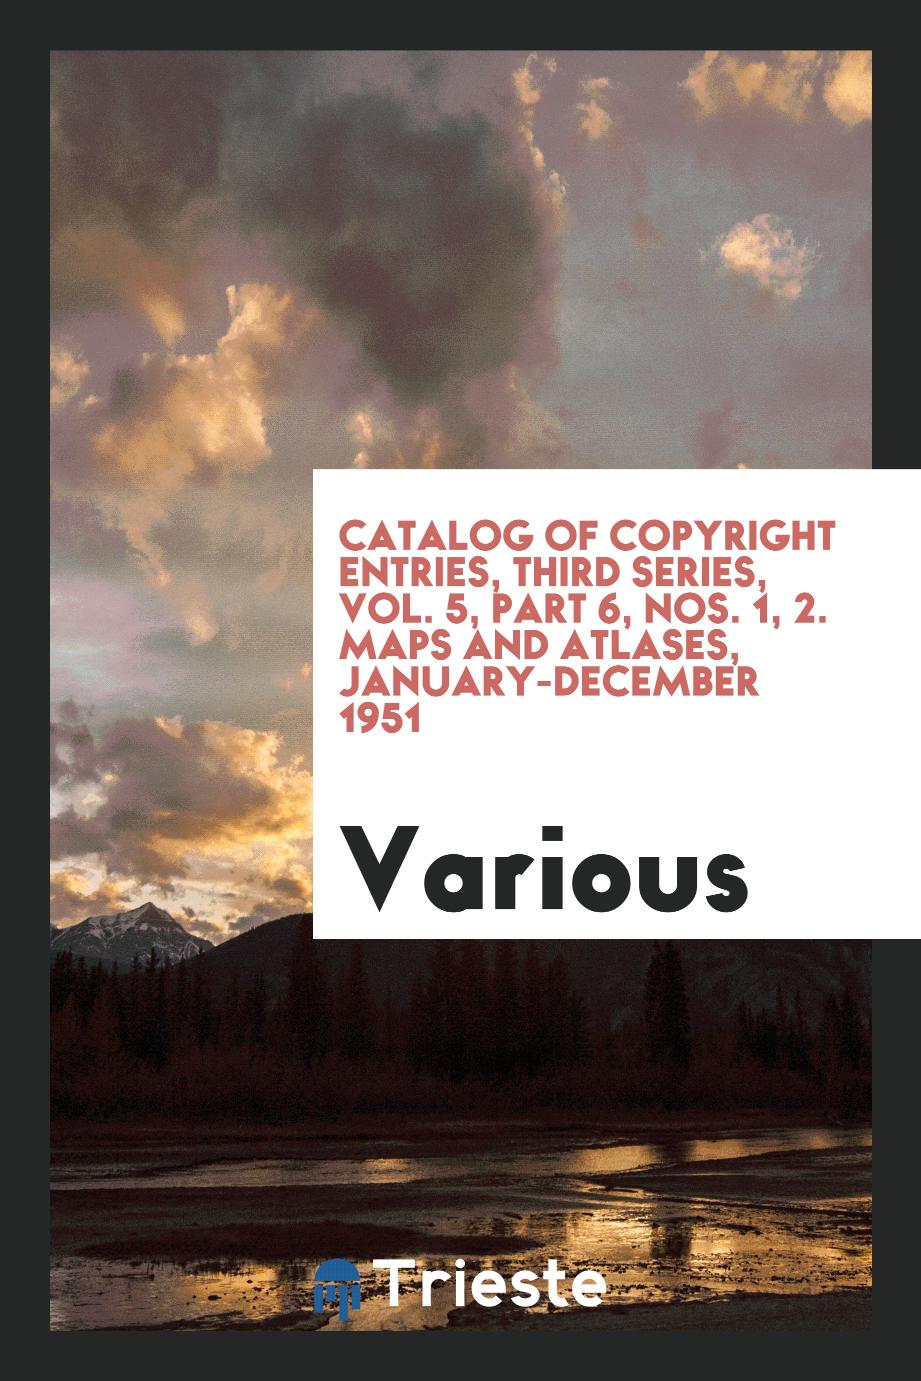 Catalog of Copyright Entries, Third Series, Vol. 5, Part 6, Nos. 1, 2. Maps and Atlases, January-December 1951